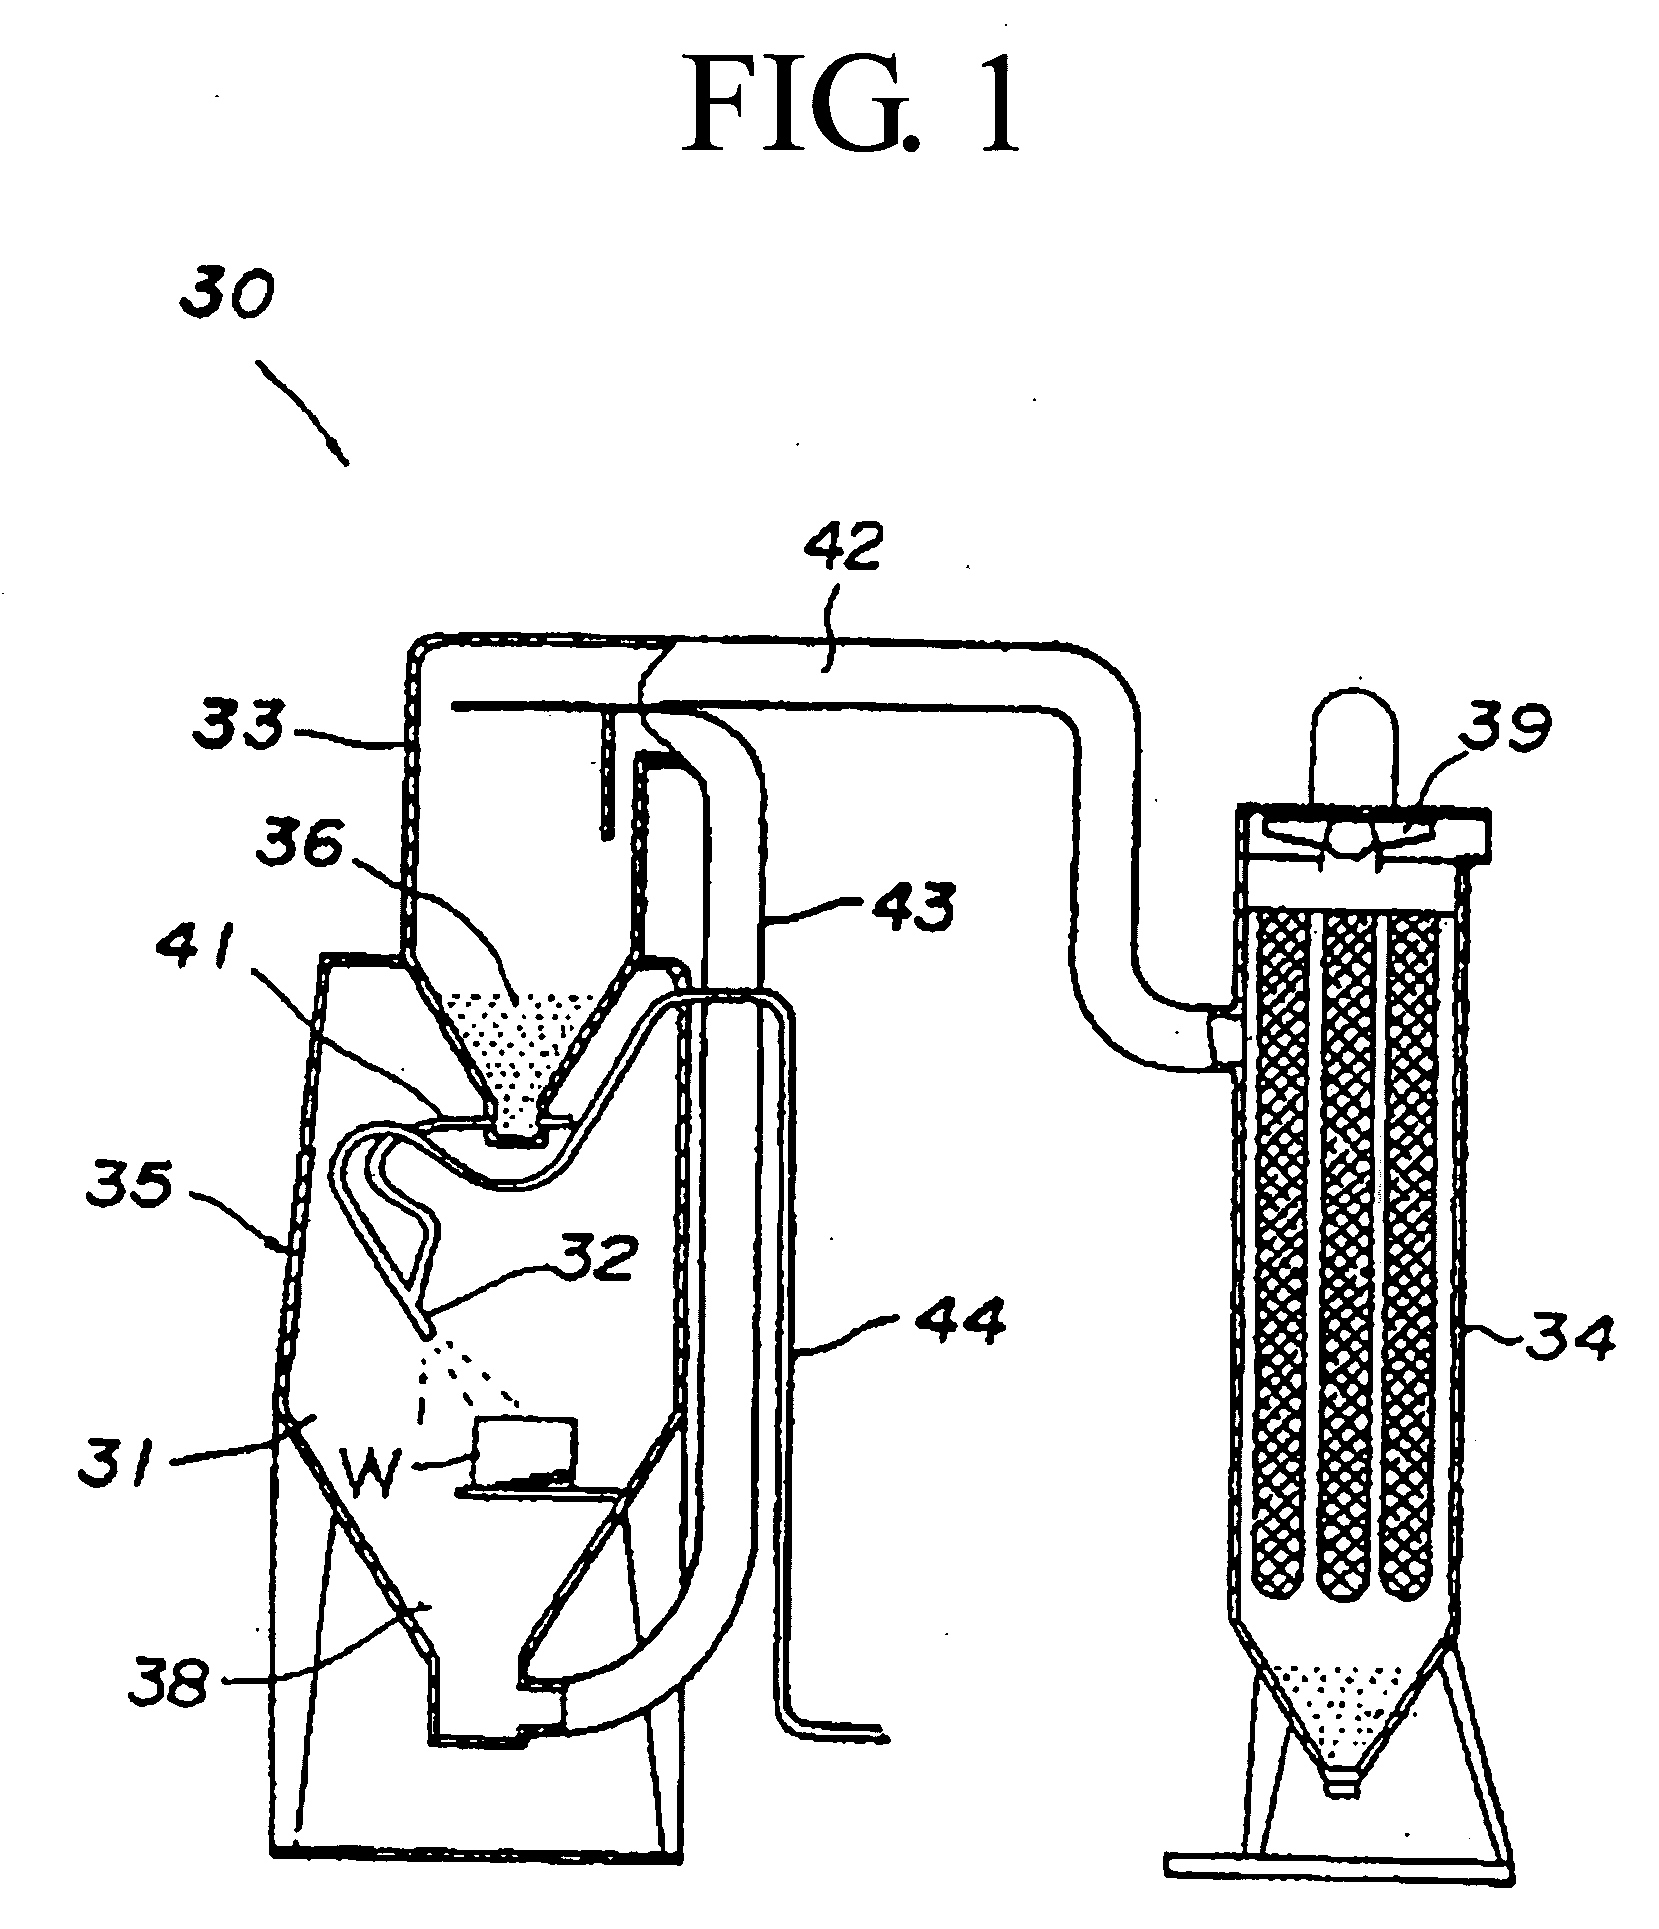 Abrasive cleaning agent, method for manufacturing the same, and method for polishing using abrasive cleaning agent